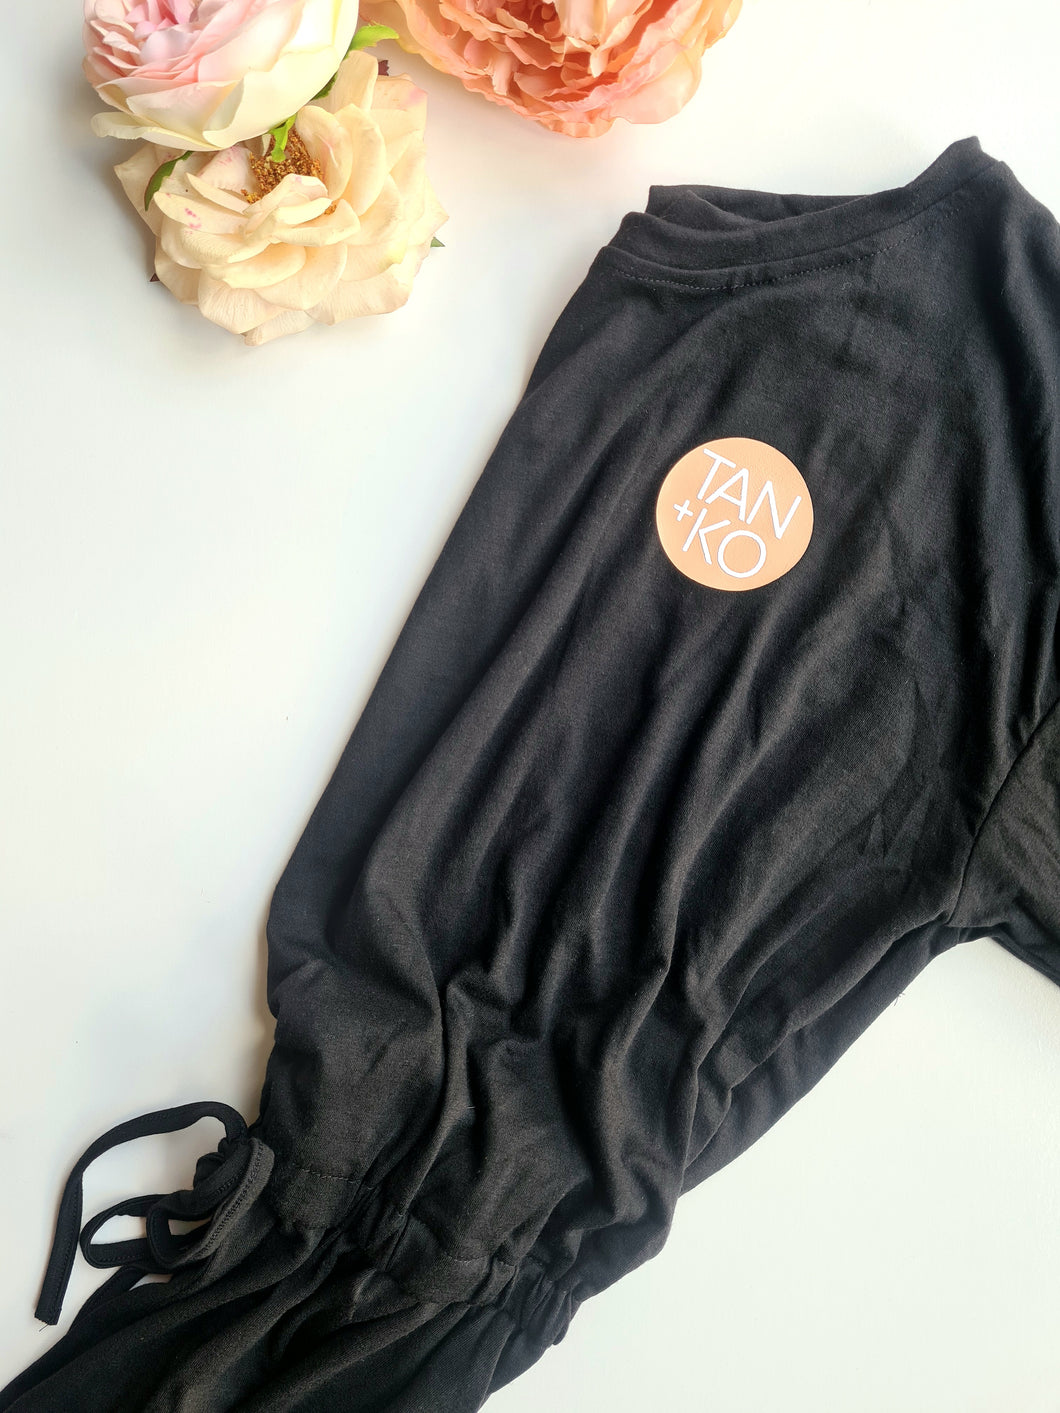 Koko's Black Tanning Onezie for tanning brands and MUAs